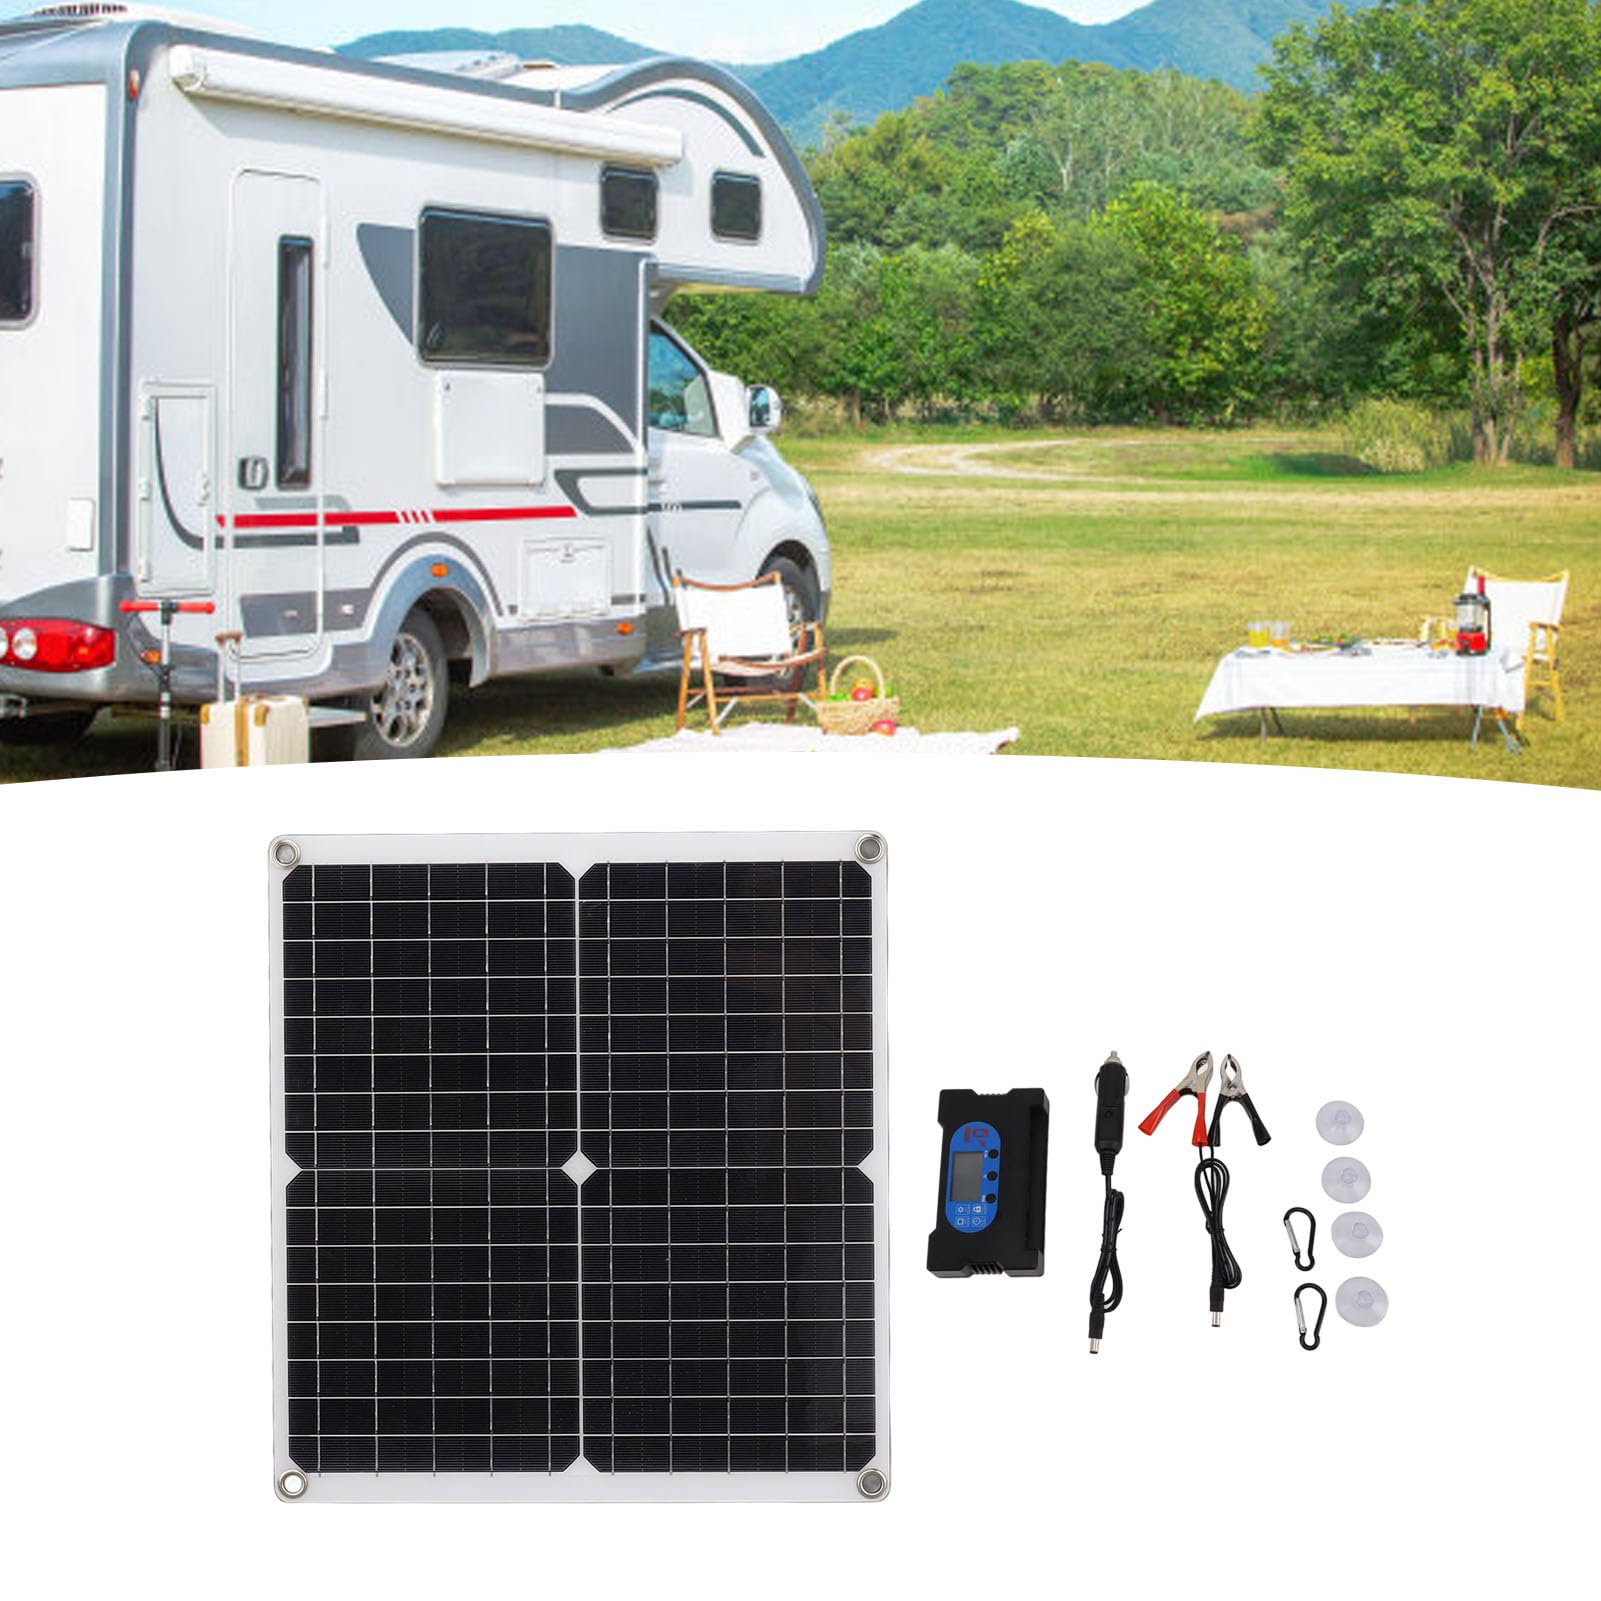 Solar Panel Kit, Monocrystalline Silicon Solar Charger with Controller Battery Maintainer Trickle Charger for Car RV Marine Boat